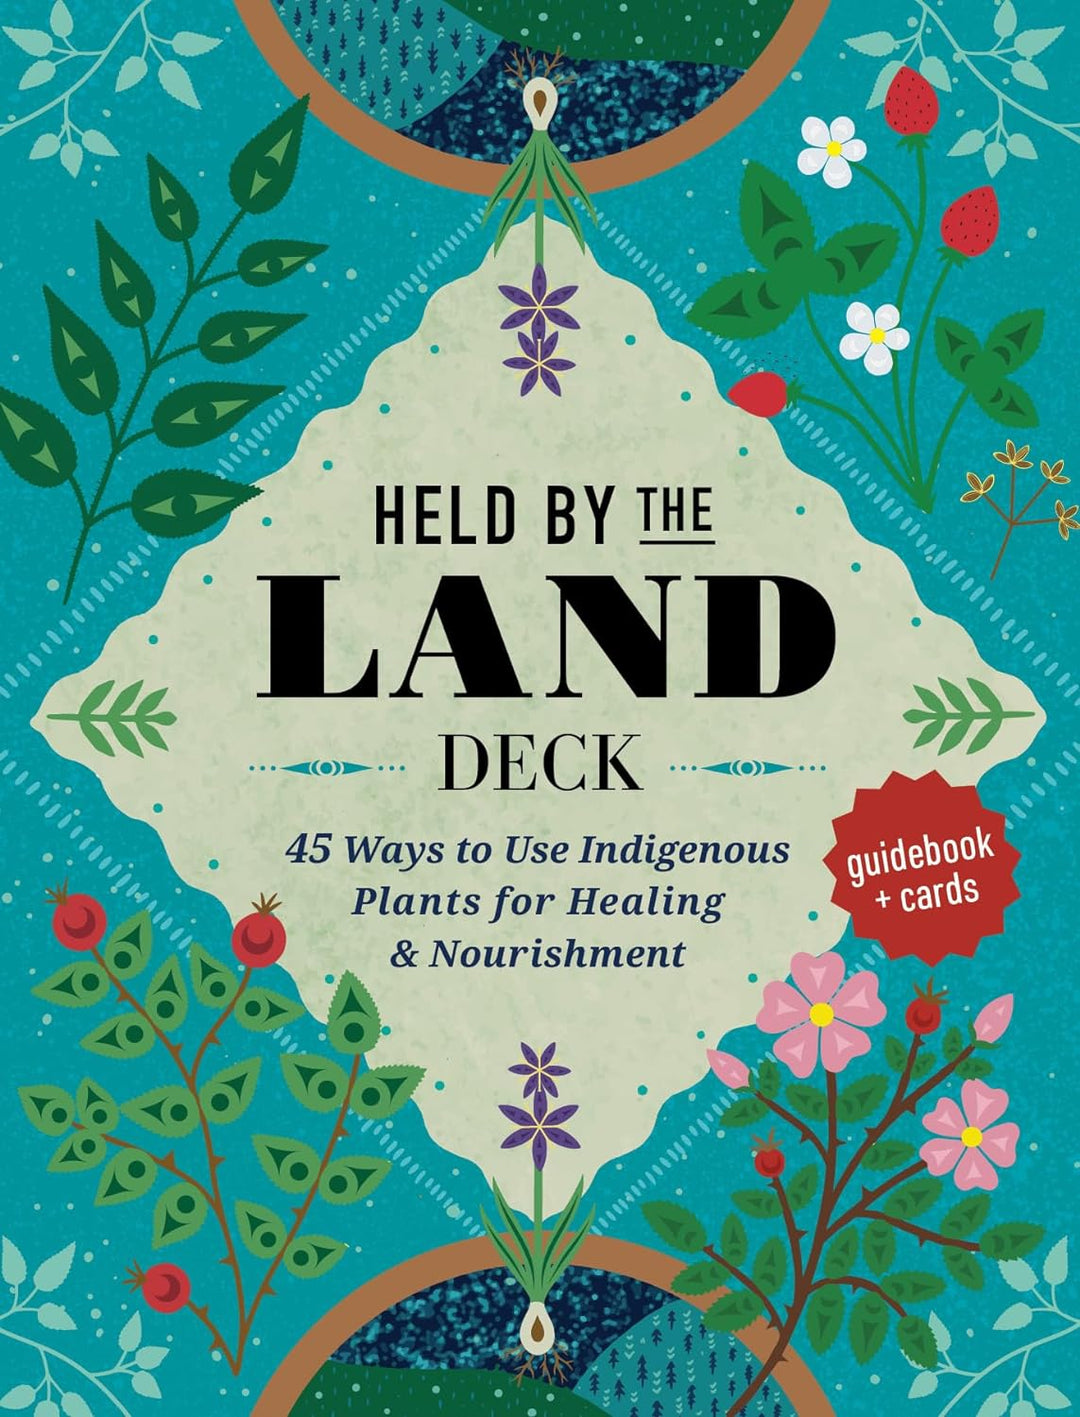  Held by the Land Deck: 45 Ways to Use Indigenous Plants for Healings & Nourishment by Leigh Joseph